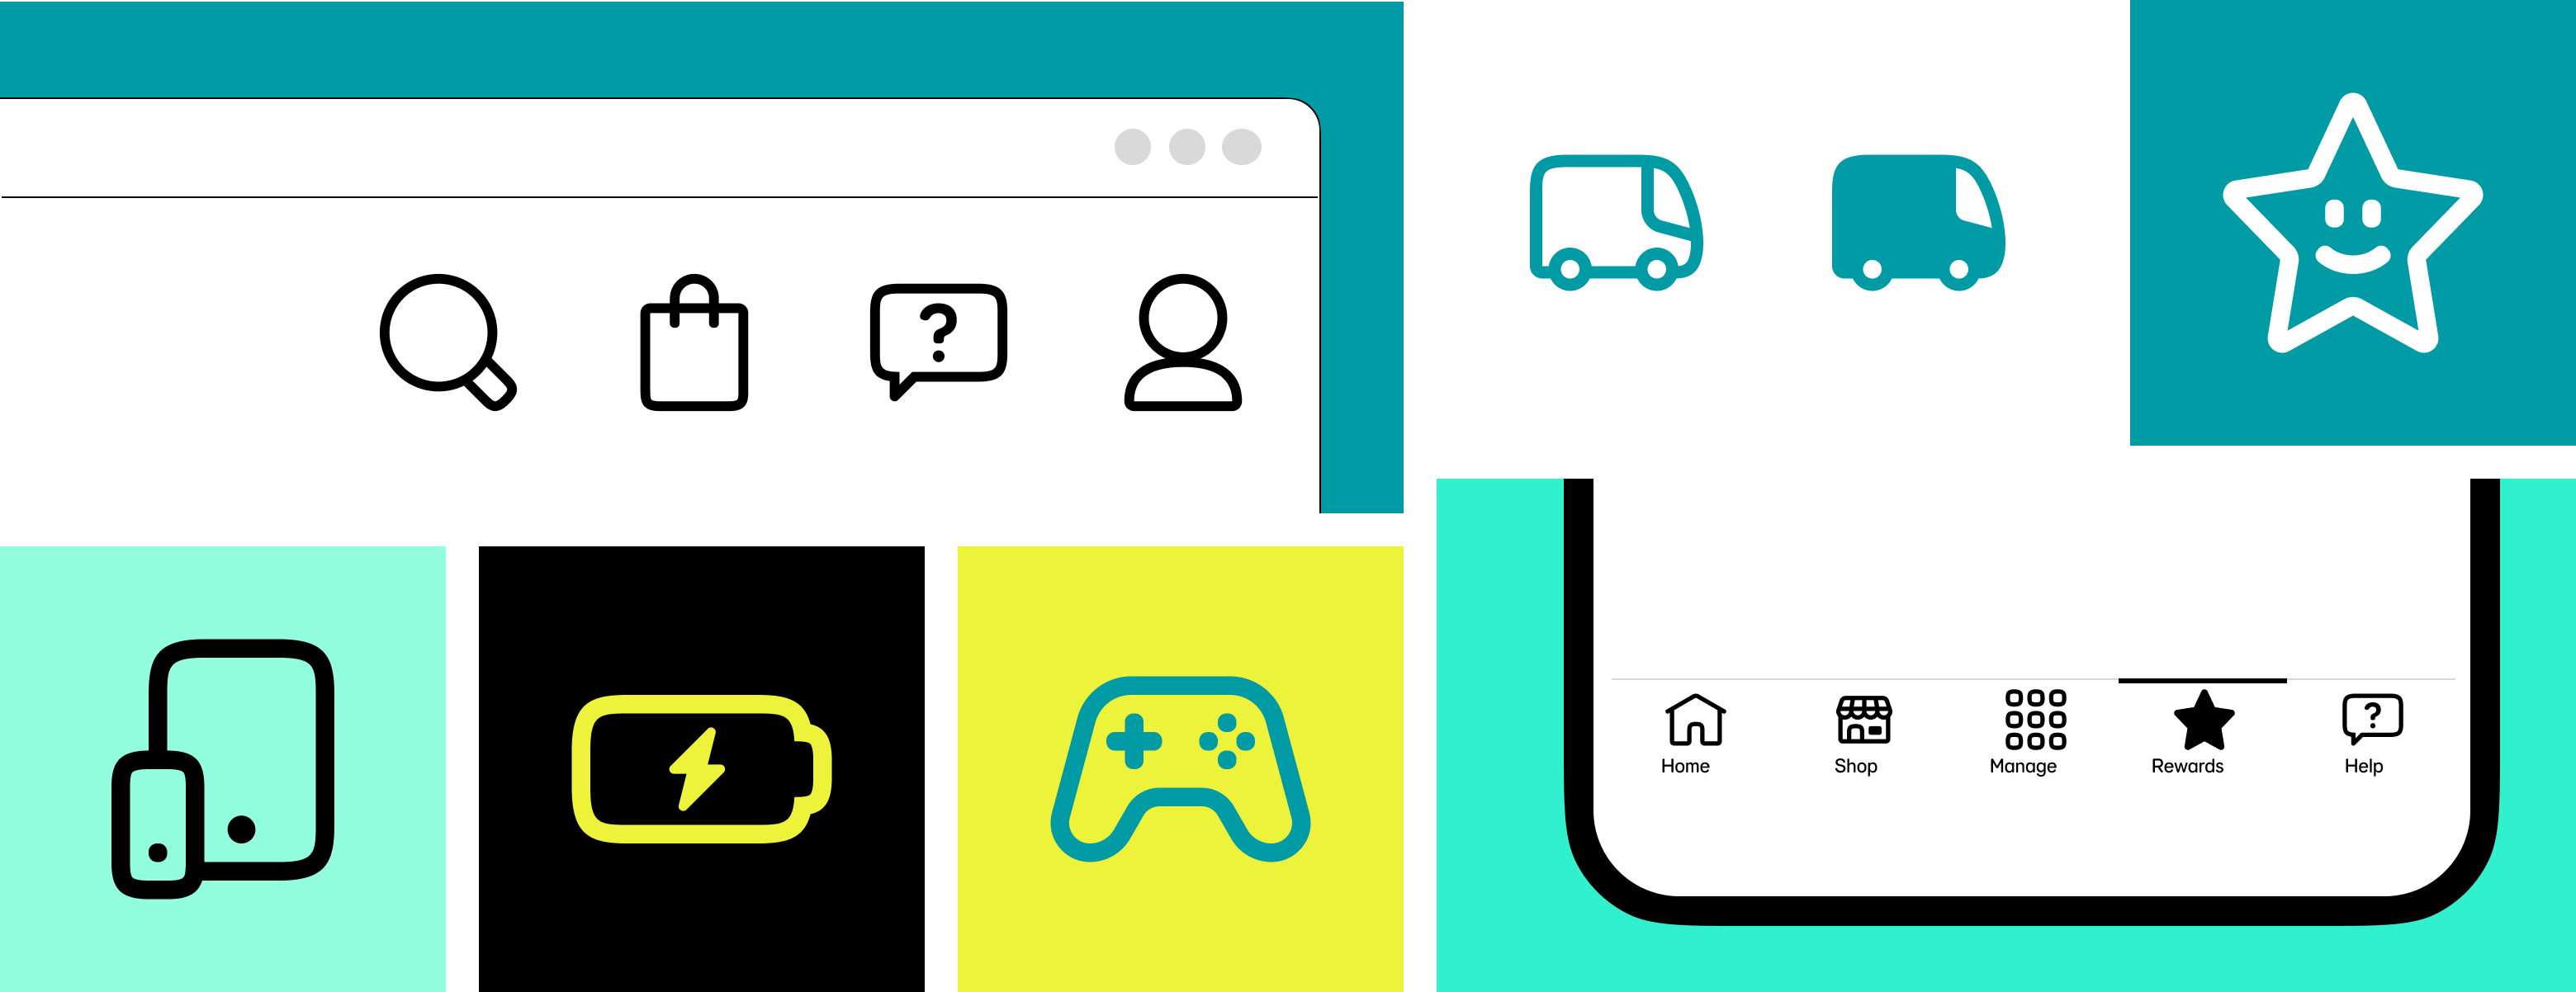 ee_icon_examples